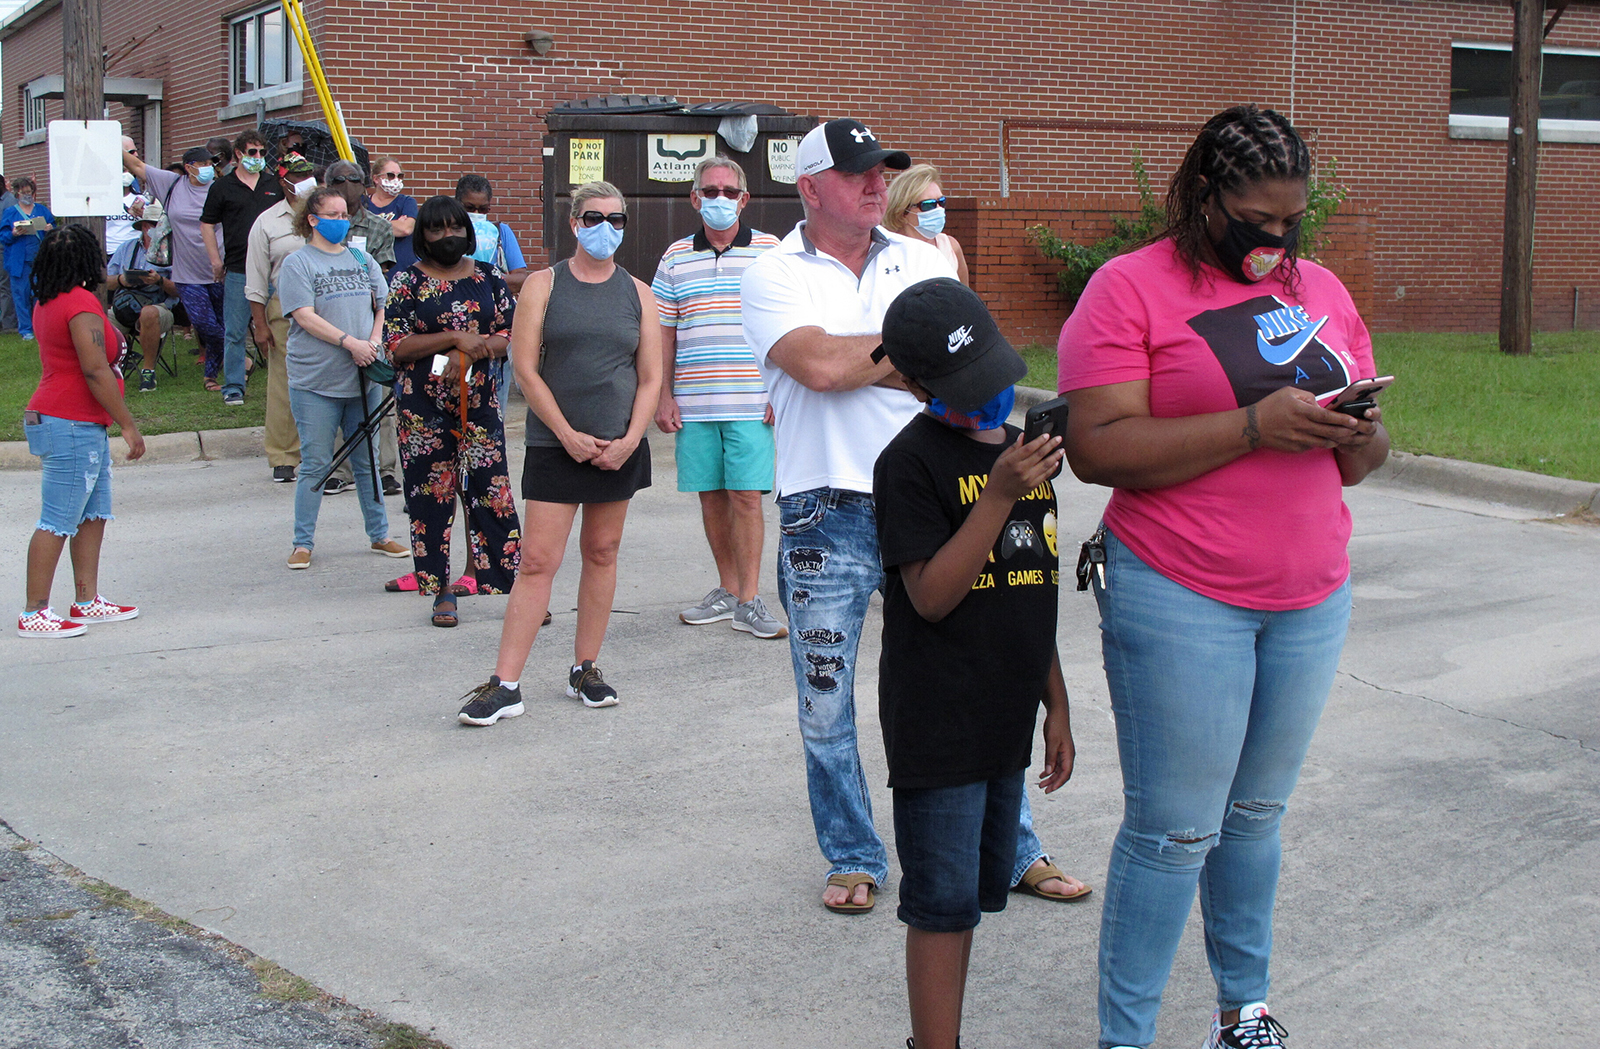 Voters wearing masks wait in line to vote early outside the Chatham County Board of Elections office in Savannah, Georgia, on Wednesday, Oct. 14, 2020. (AP Photo/Russ Bynum)